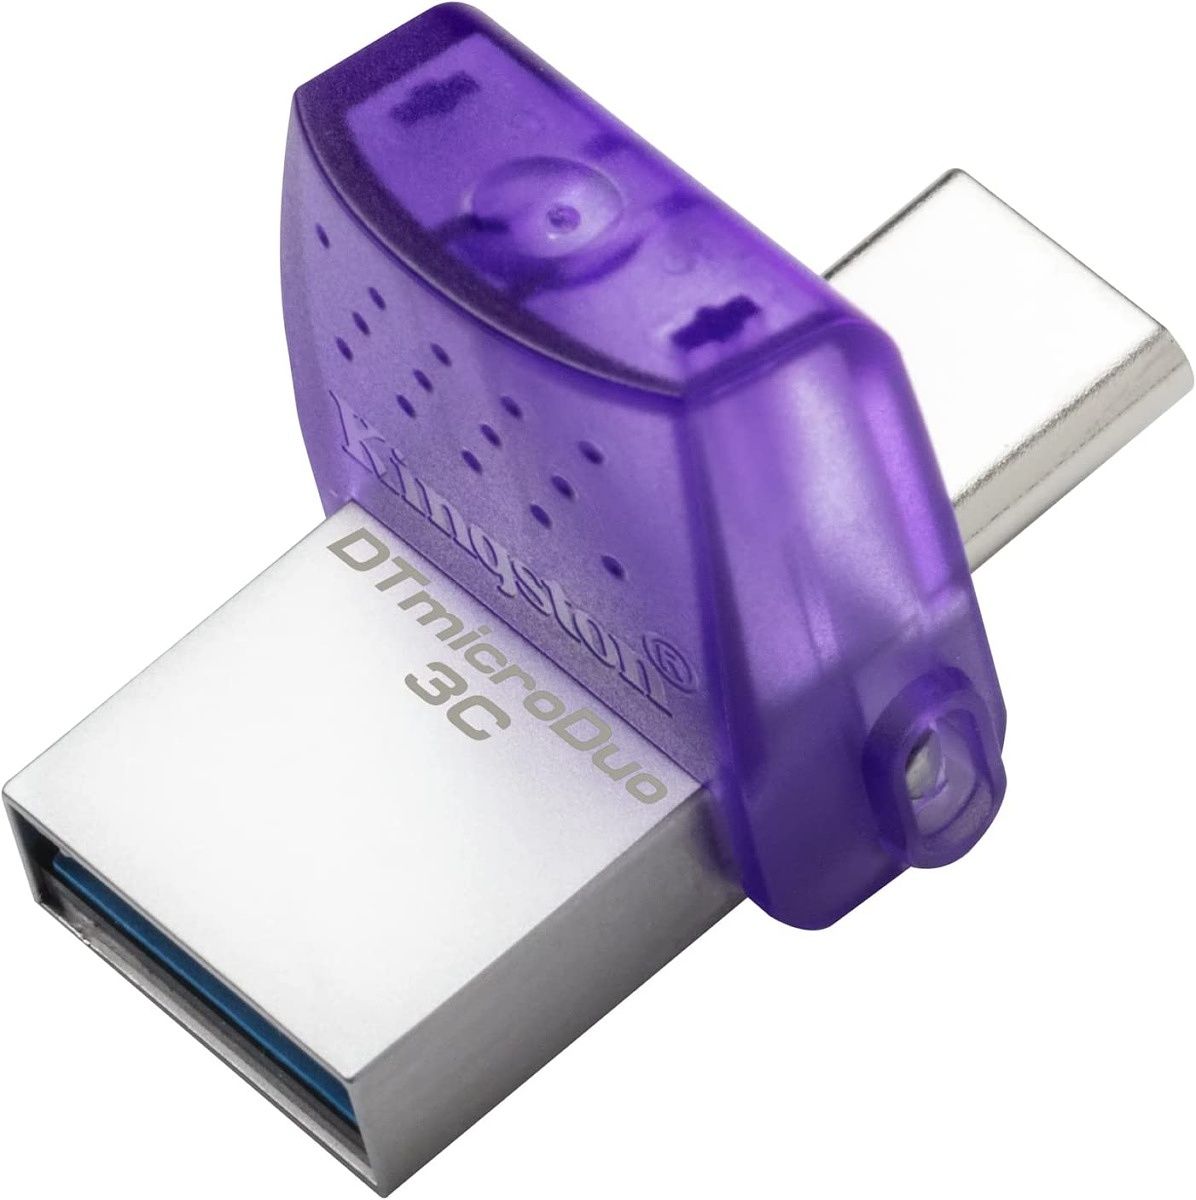 Flash drives are still the most portable way to move files around in a pinch, and because this one has both USB-A and USB-C, you can use it with almost any laptop or Android phone. It comes in up to a 256GB size, so it's still fairly capable.